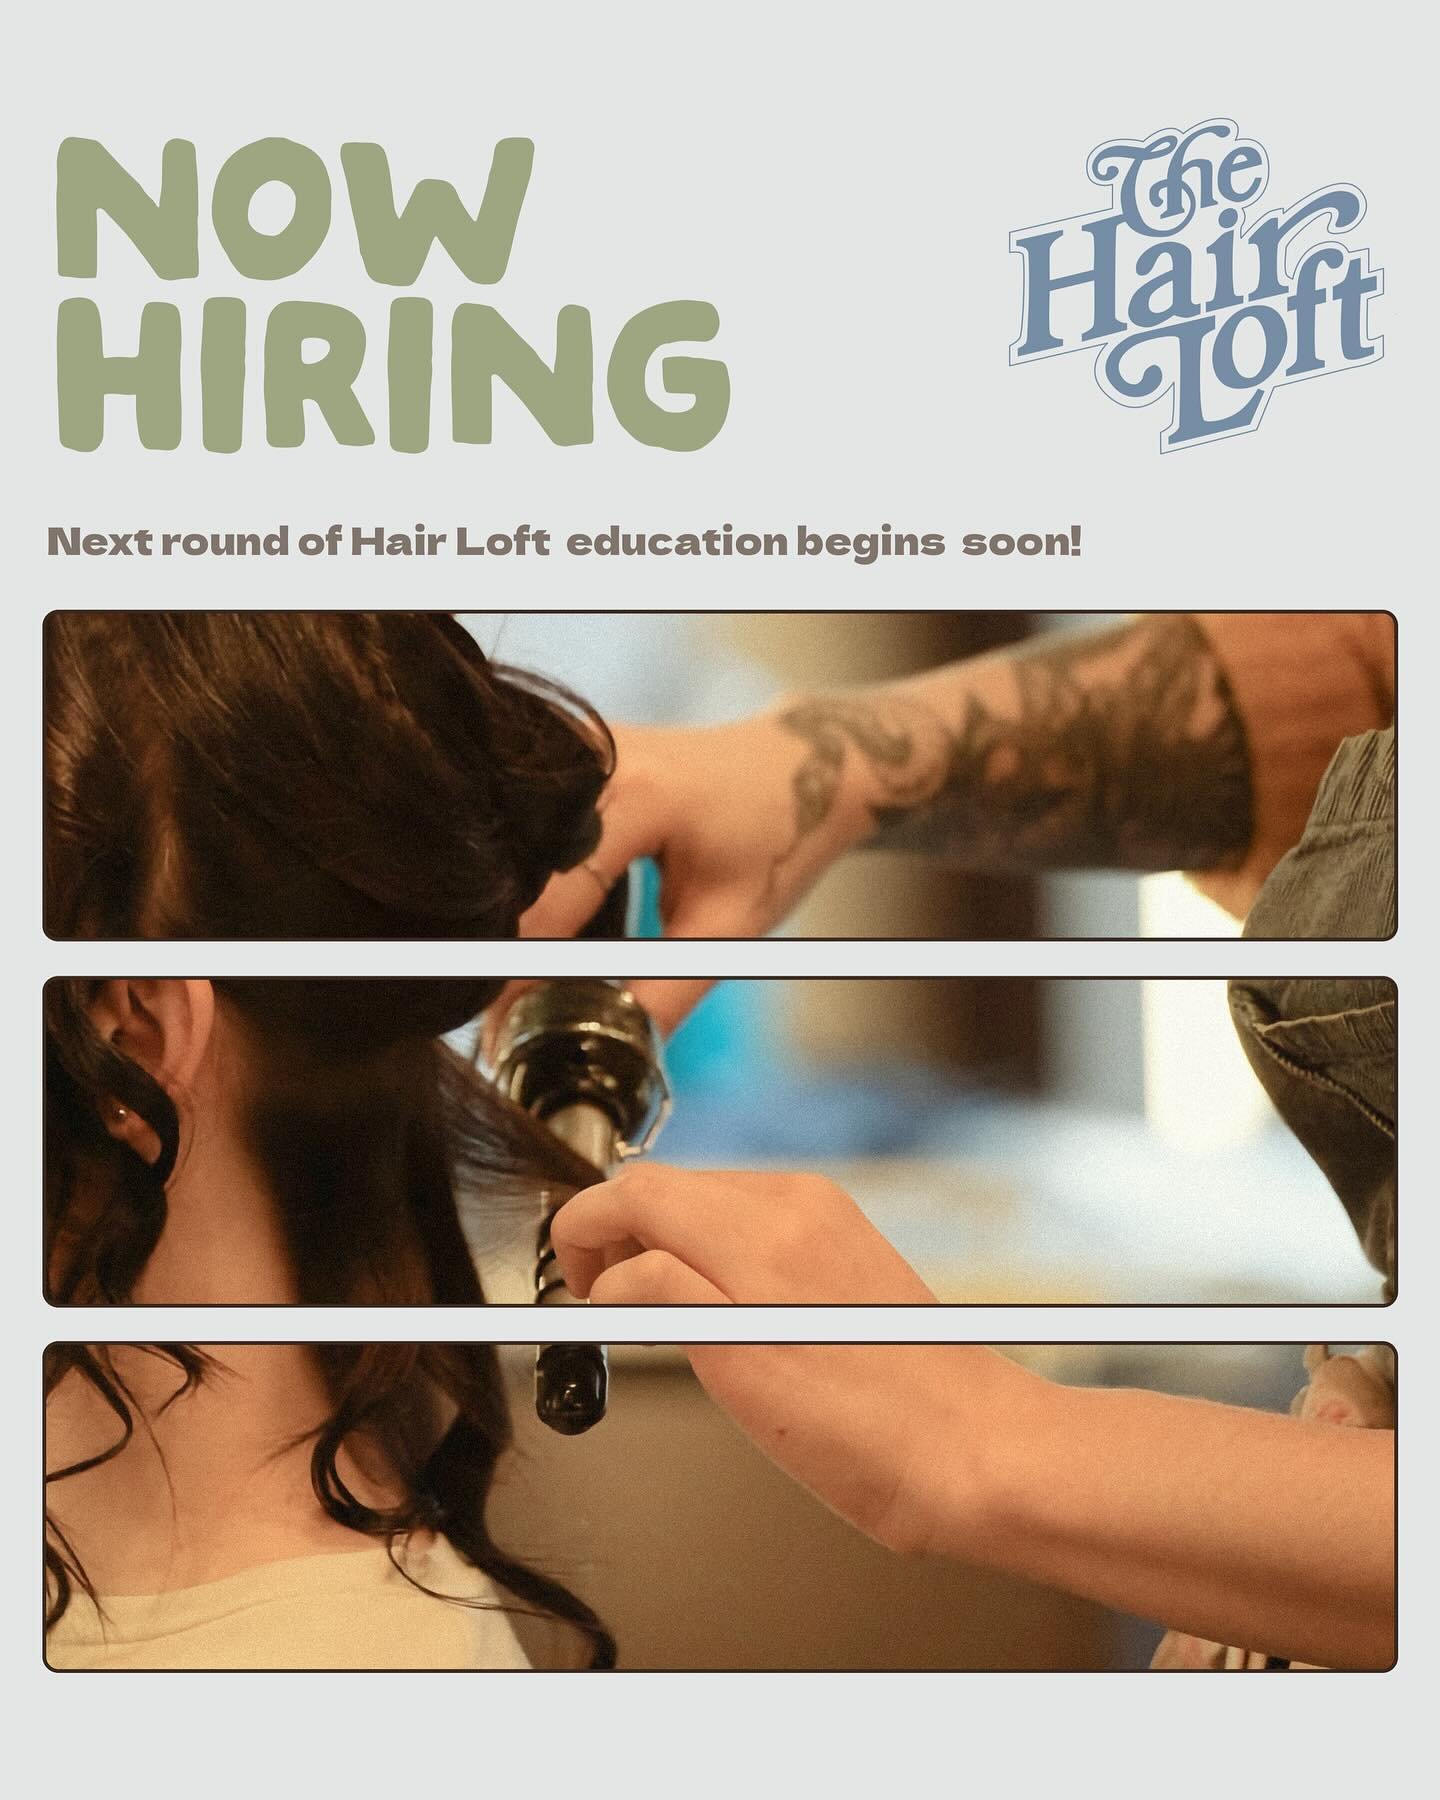 Calling all devoting hair stylists! ✌🏽Our next round of our in-house education is starting soon. This is our program to take excited new stylists and train them to deliver a top tier salon experience and have a healthy, creative career. 👉🏽 Join us